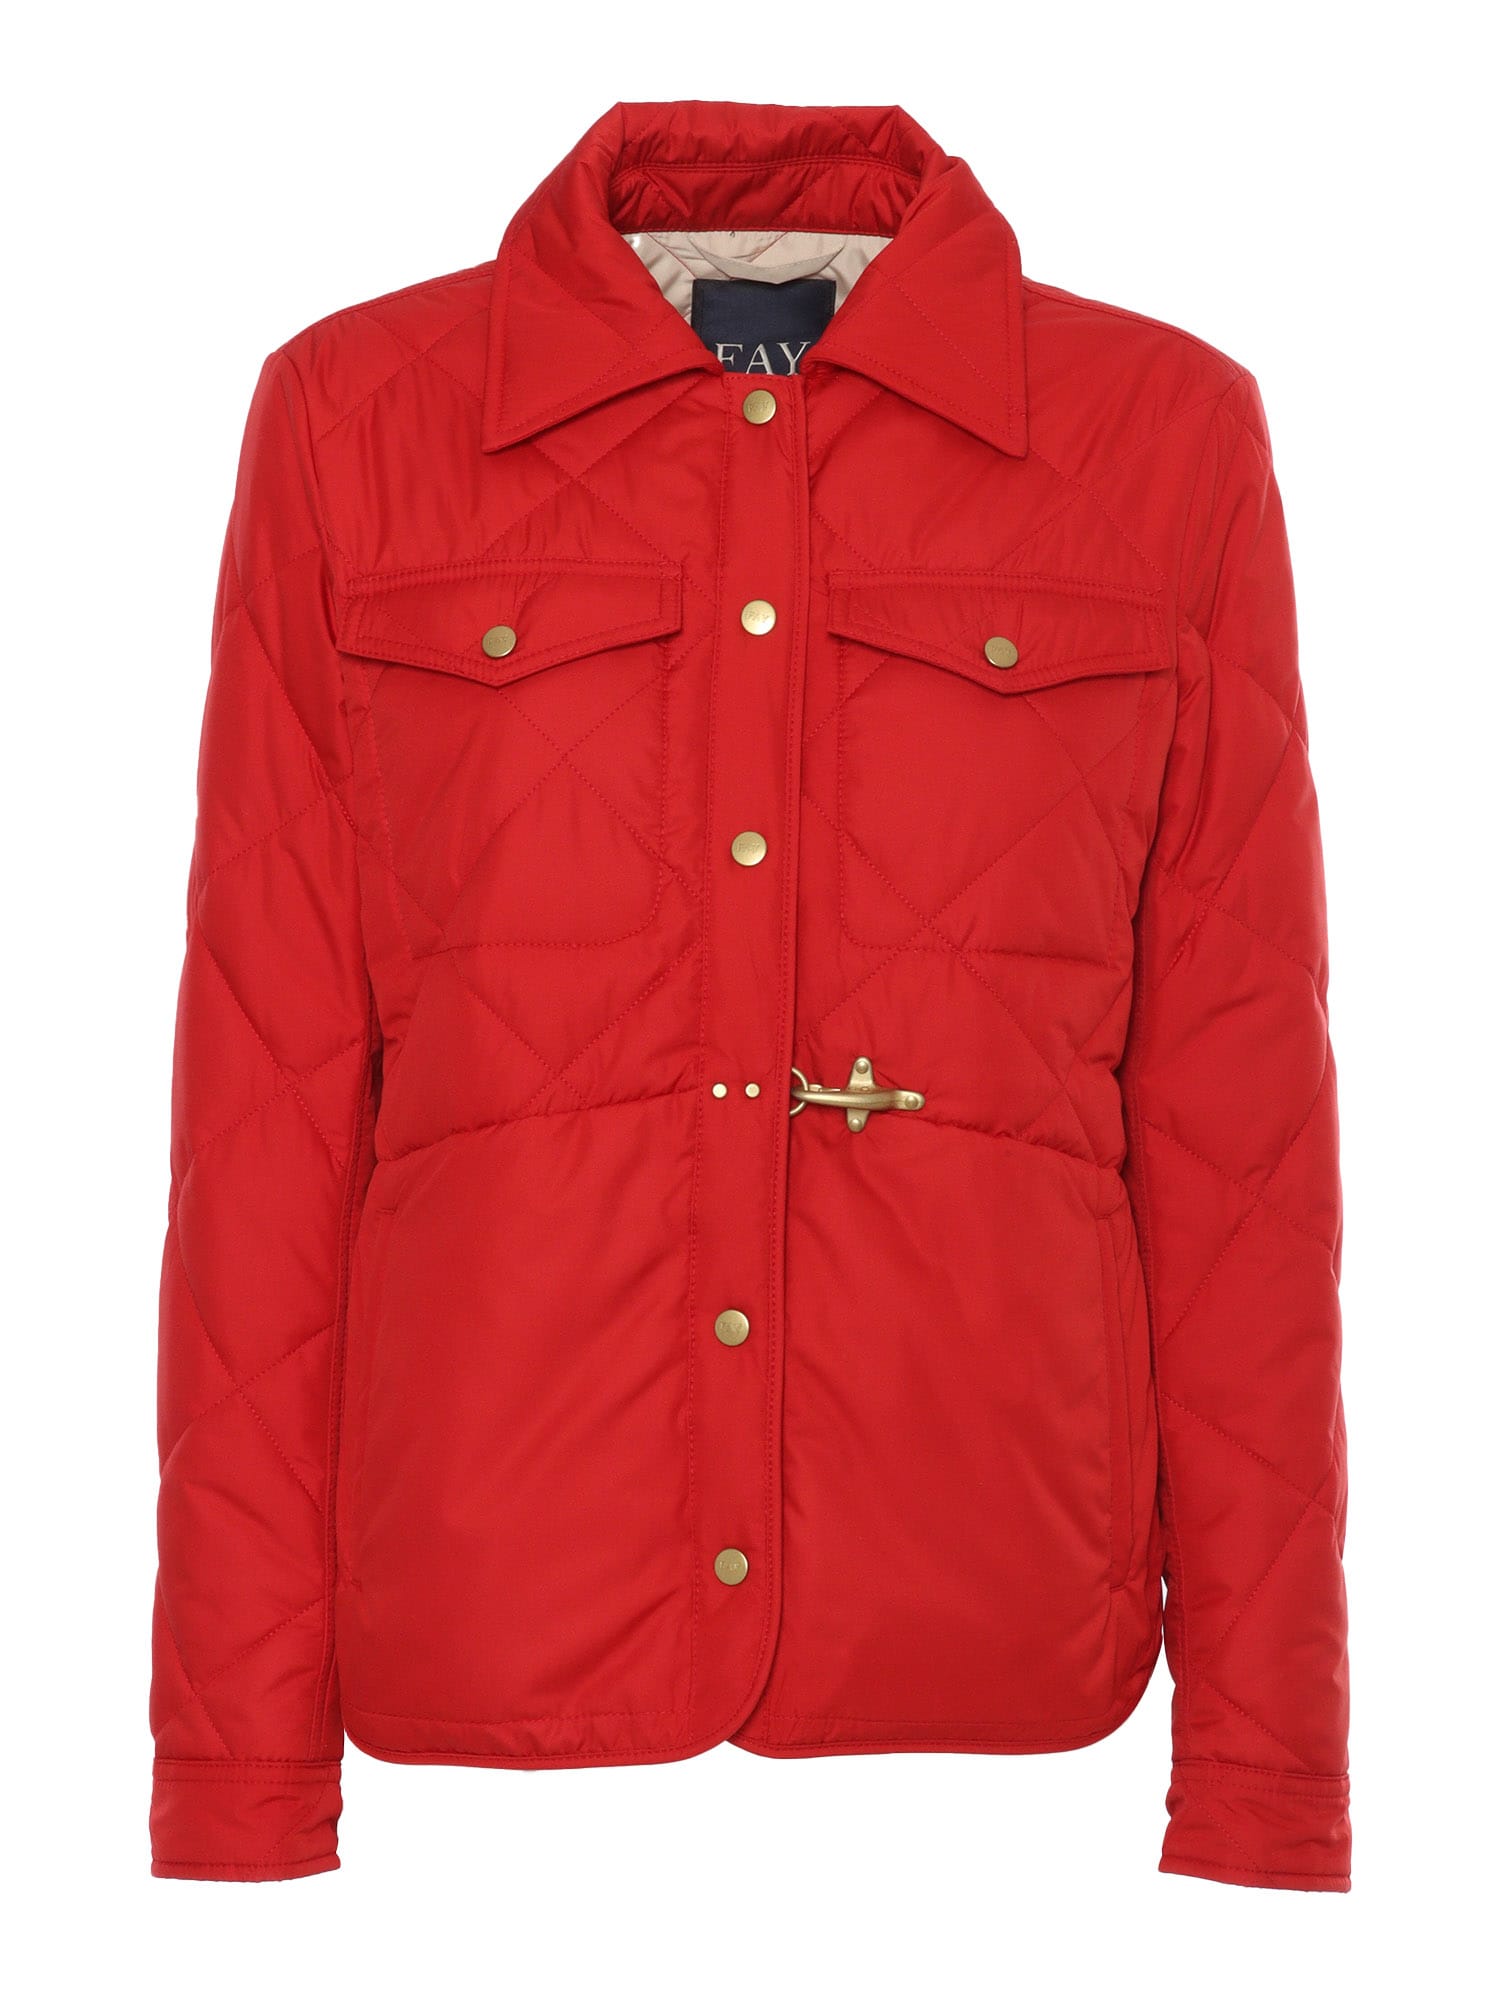 FAY RED QUILTED JACKET